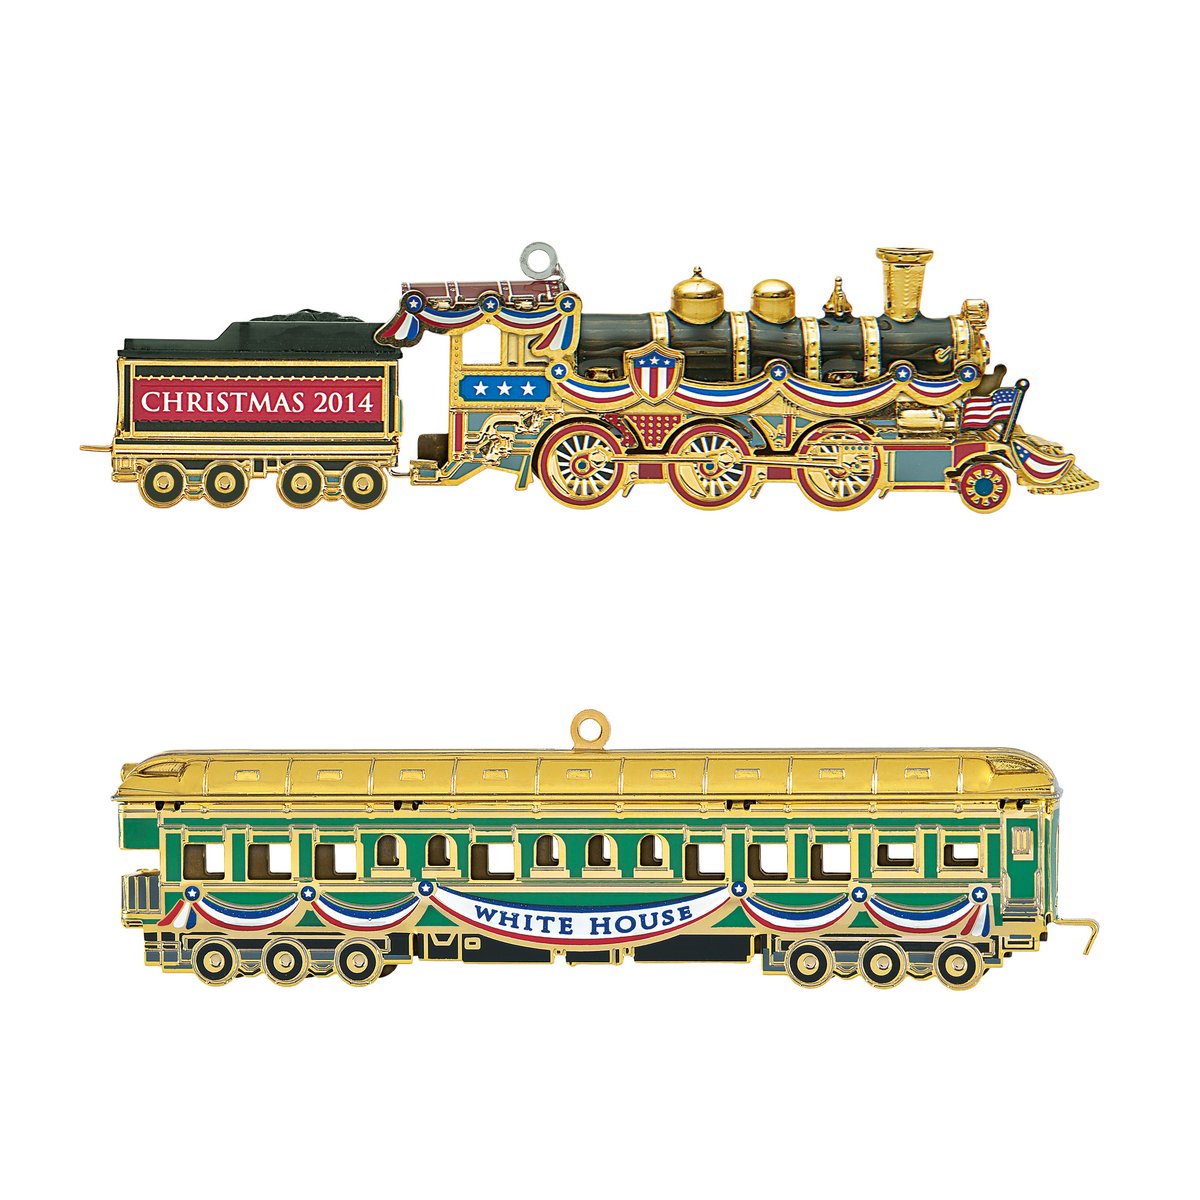 The 2014 edition remembers the administration of Warren G. Harding. The train commemorates his time at the controls on the Alaskan railroad during his “Voyage of Understanding,” a transcontinental speaking and sightseeing tour. https://shop.whitehousehistory.org/holidays/ornaments/2014-white-house-christmas-ornament